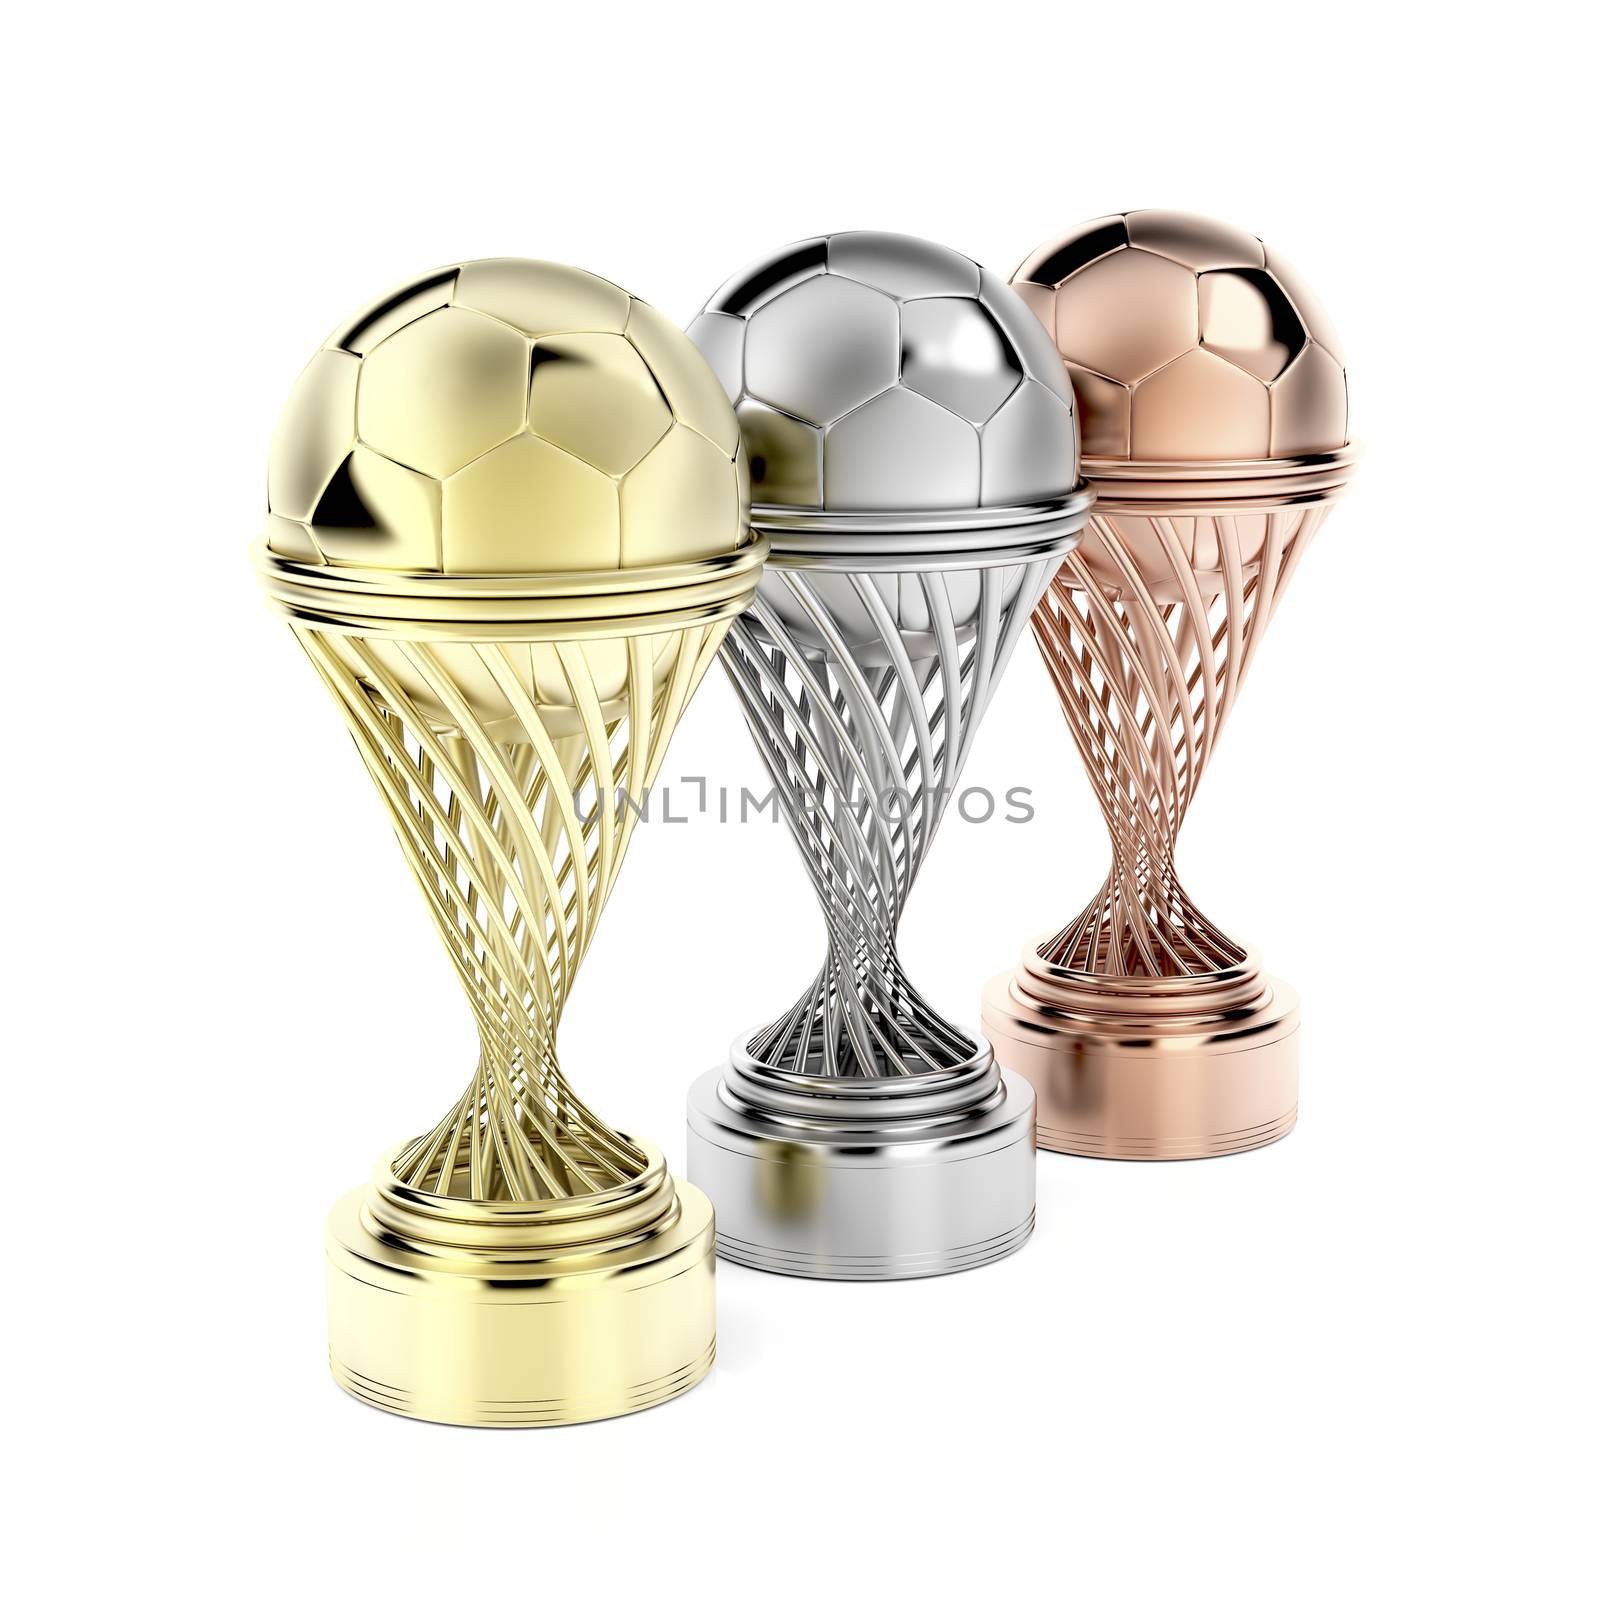 Football trophies by magraphics